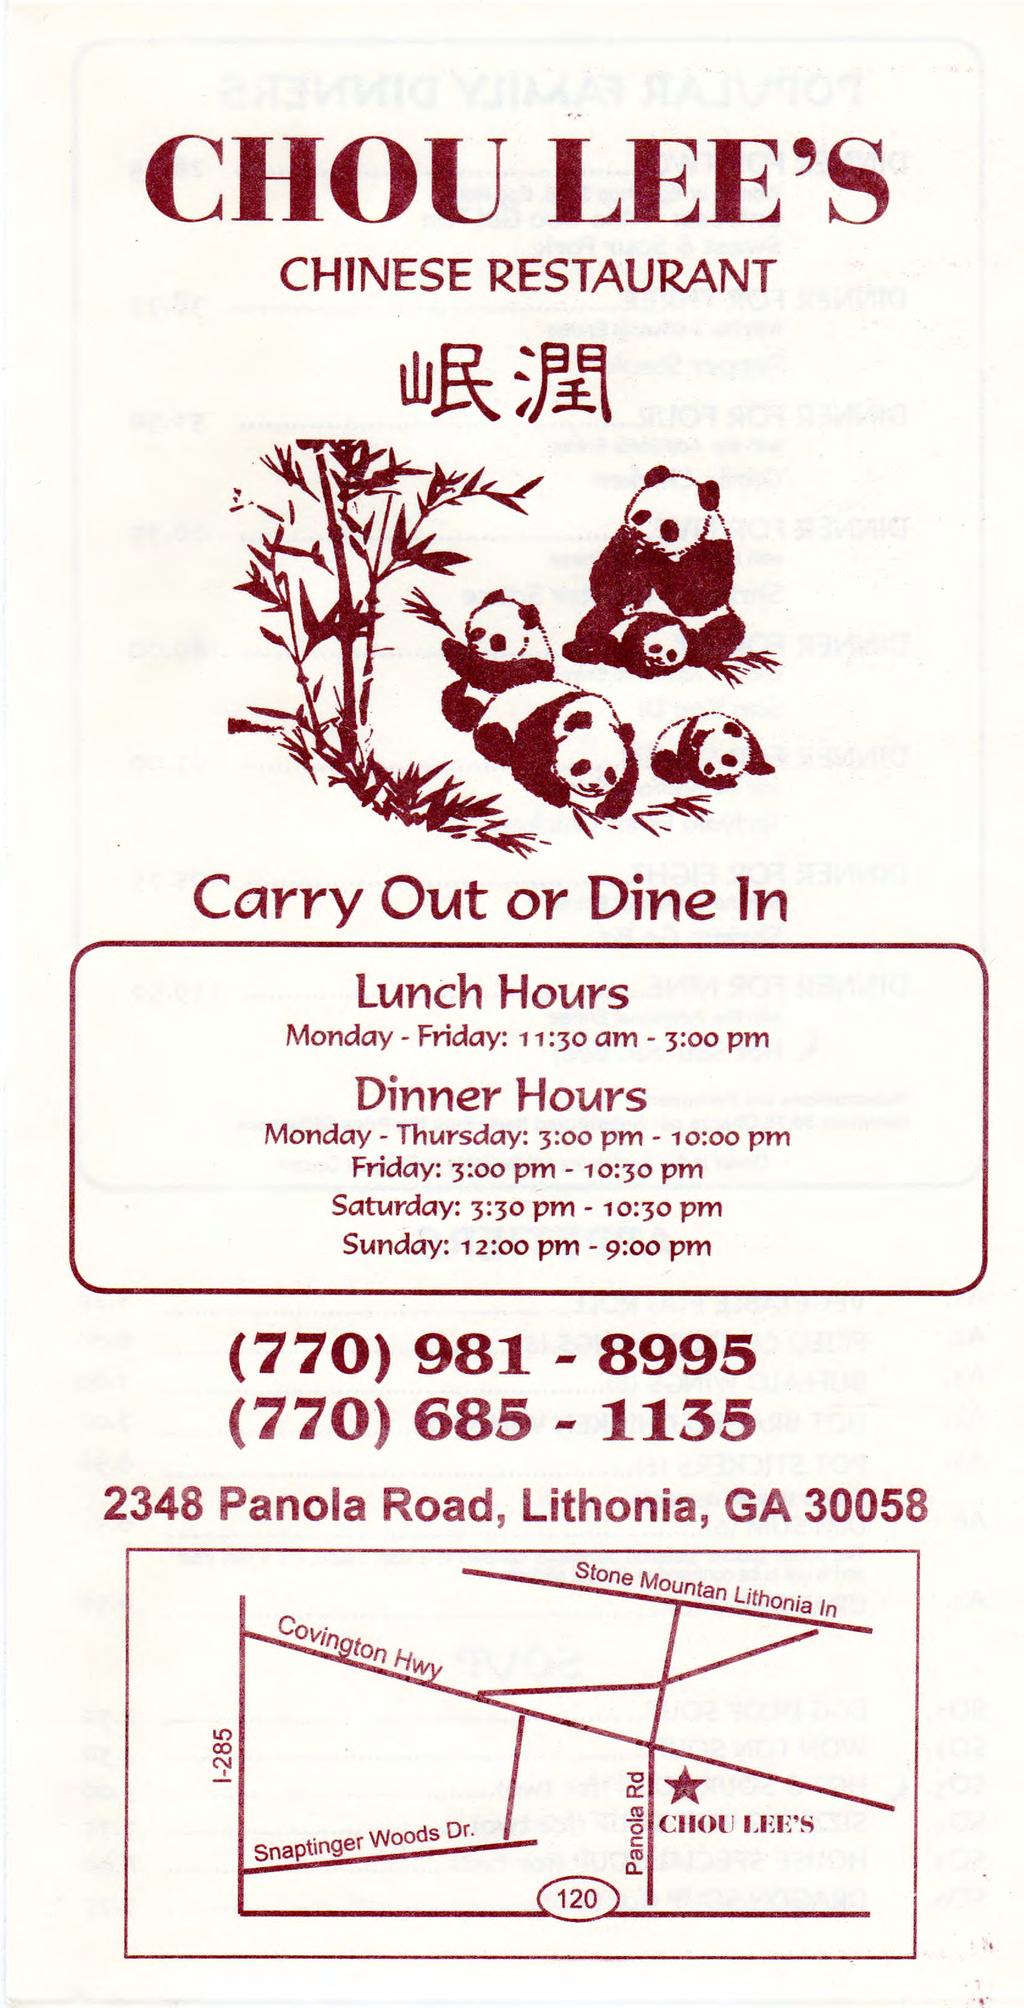 CHOU LEE'S CHINESE RESTAURANT Carry Out or Dine in Lunch Hours Monday - Friday: 11:30 am - 3:oo pm Dinner Hours Monday - Thursday: 3:oo